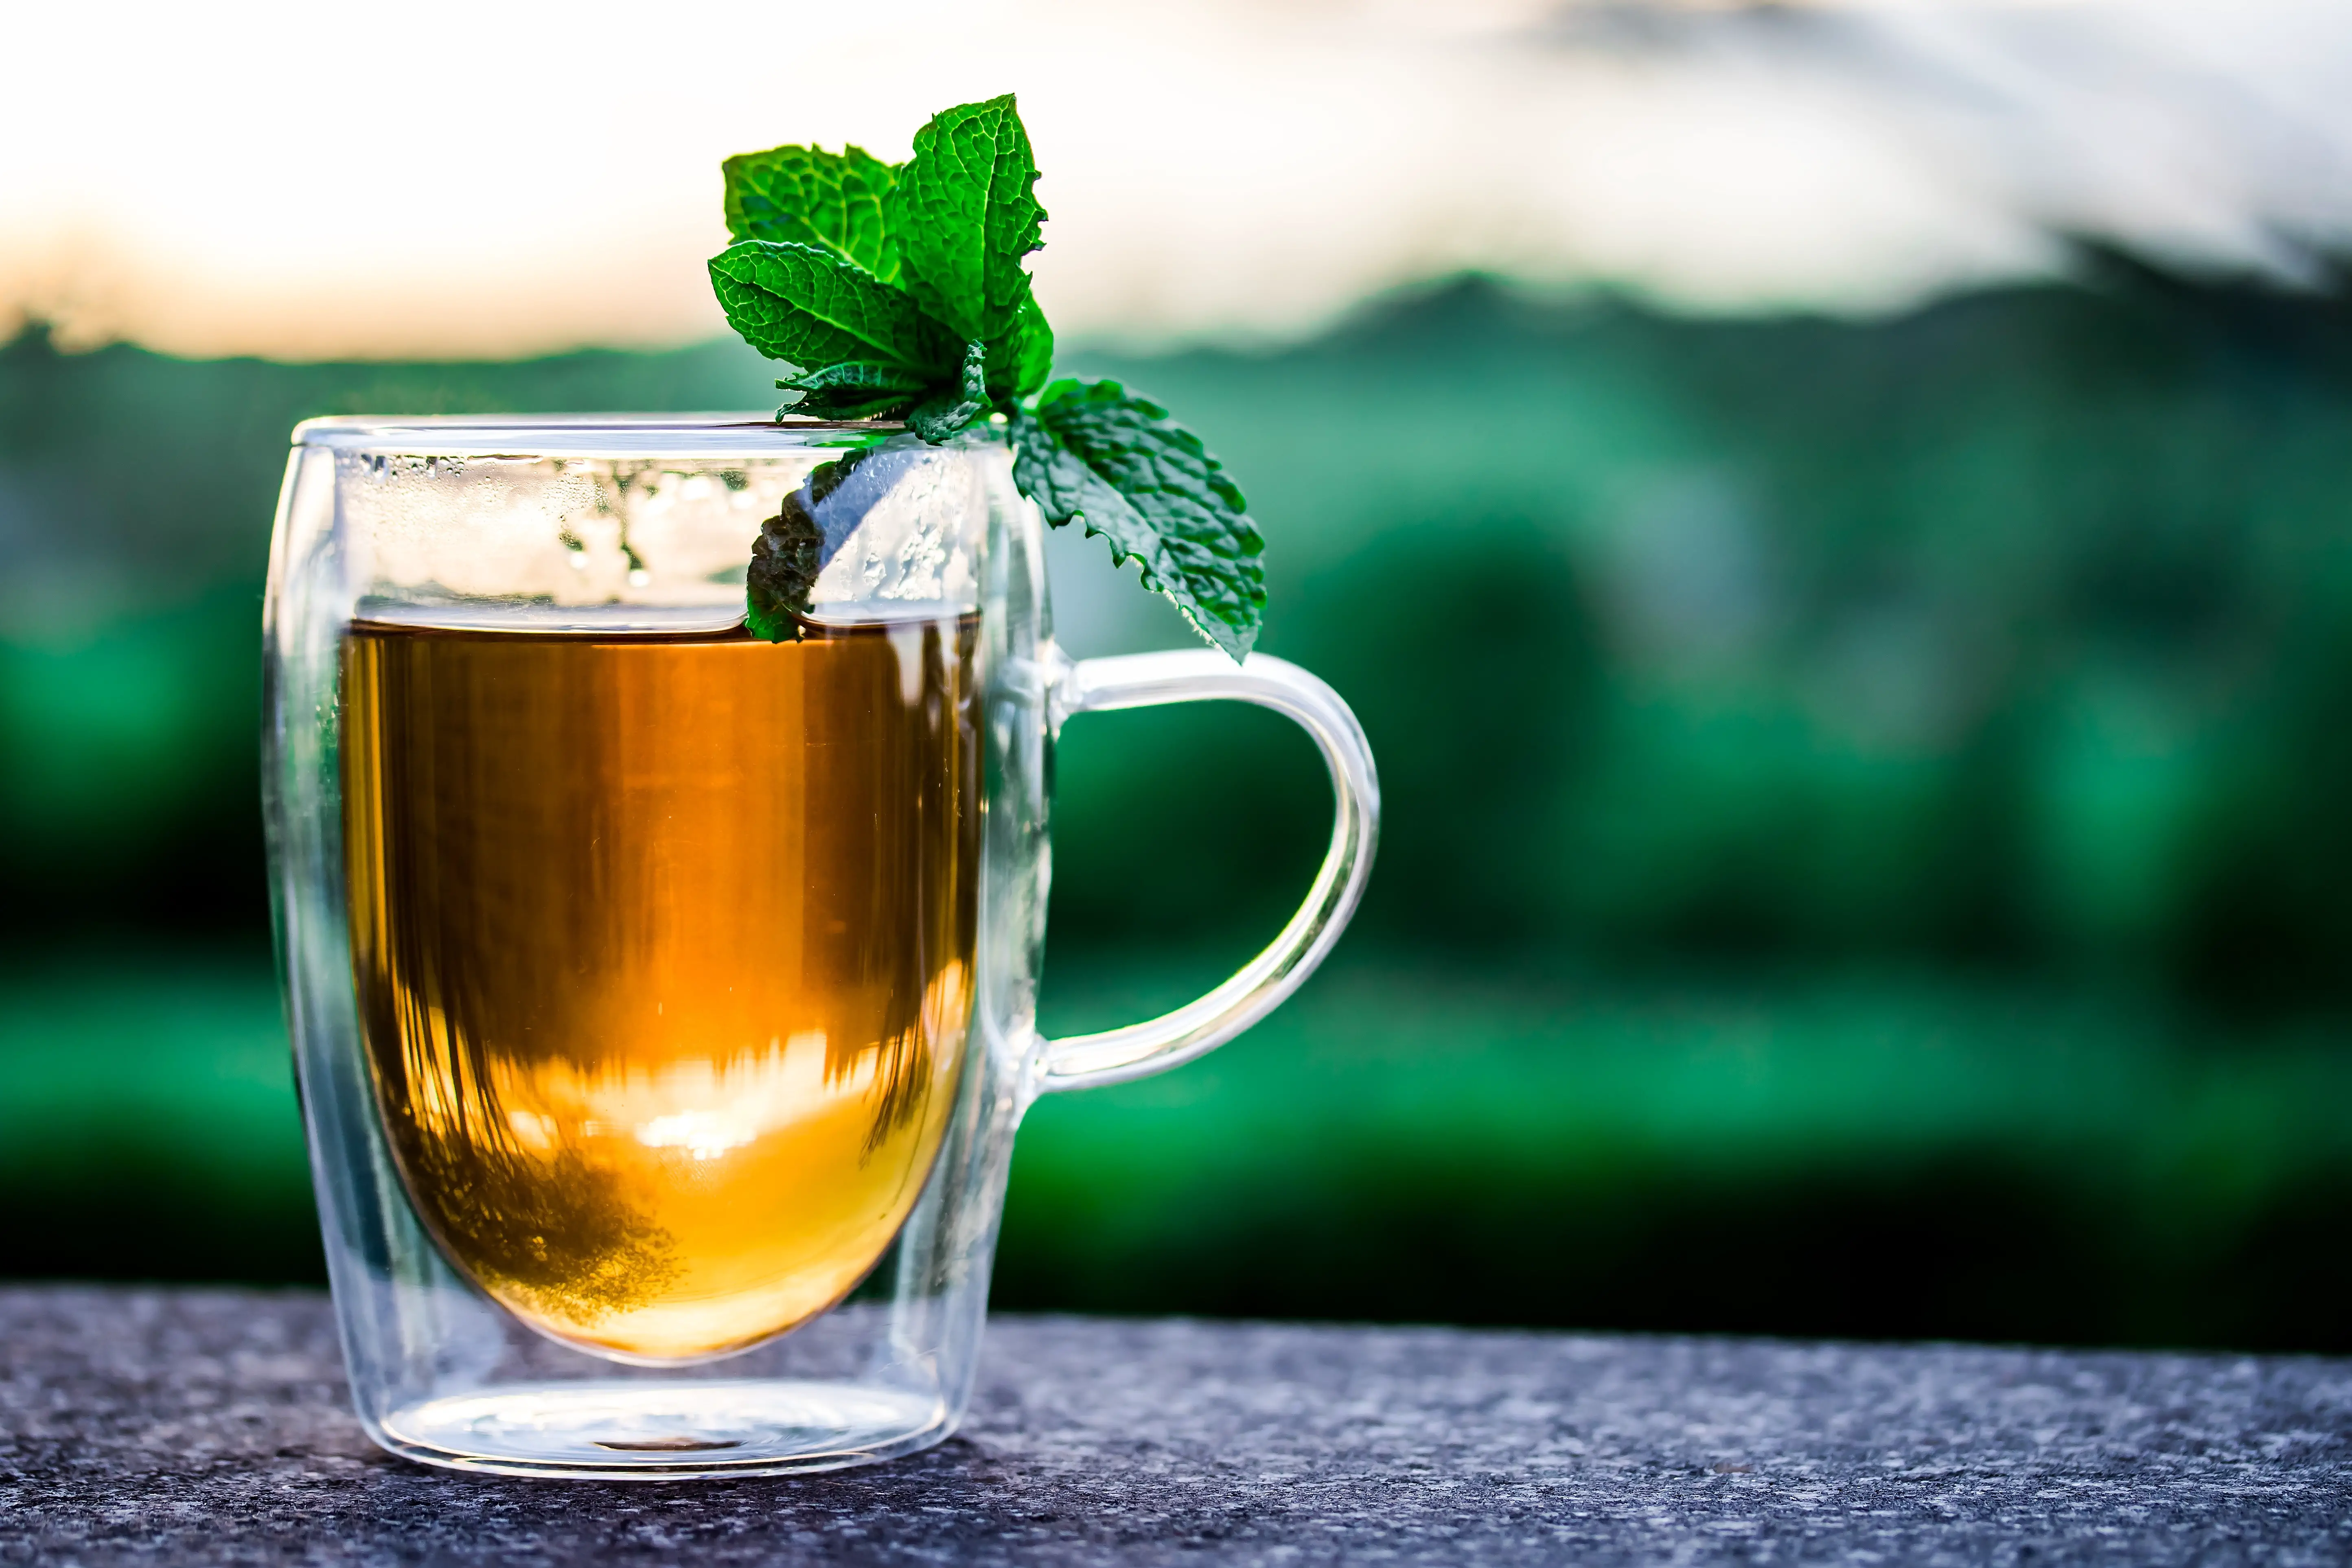 7 Known Green Tea Benefits that You Should know.